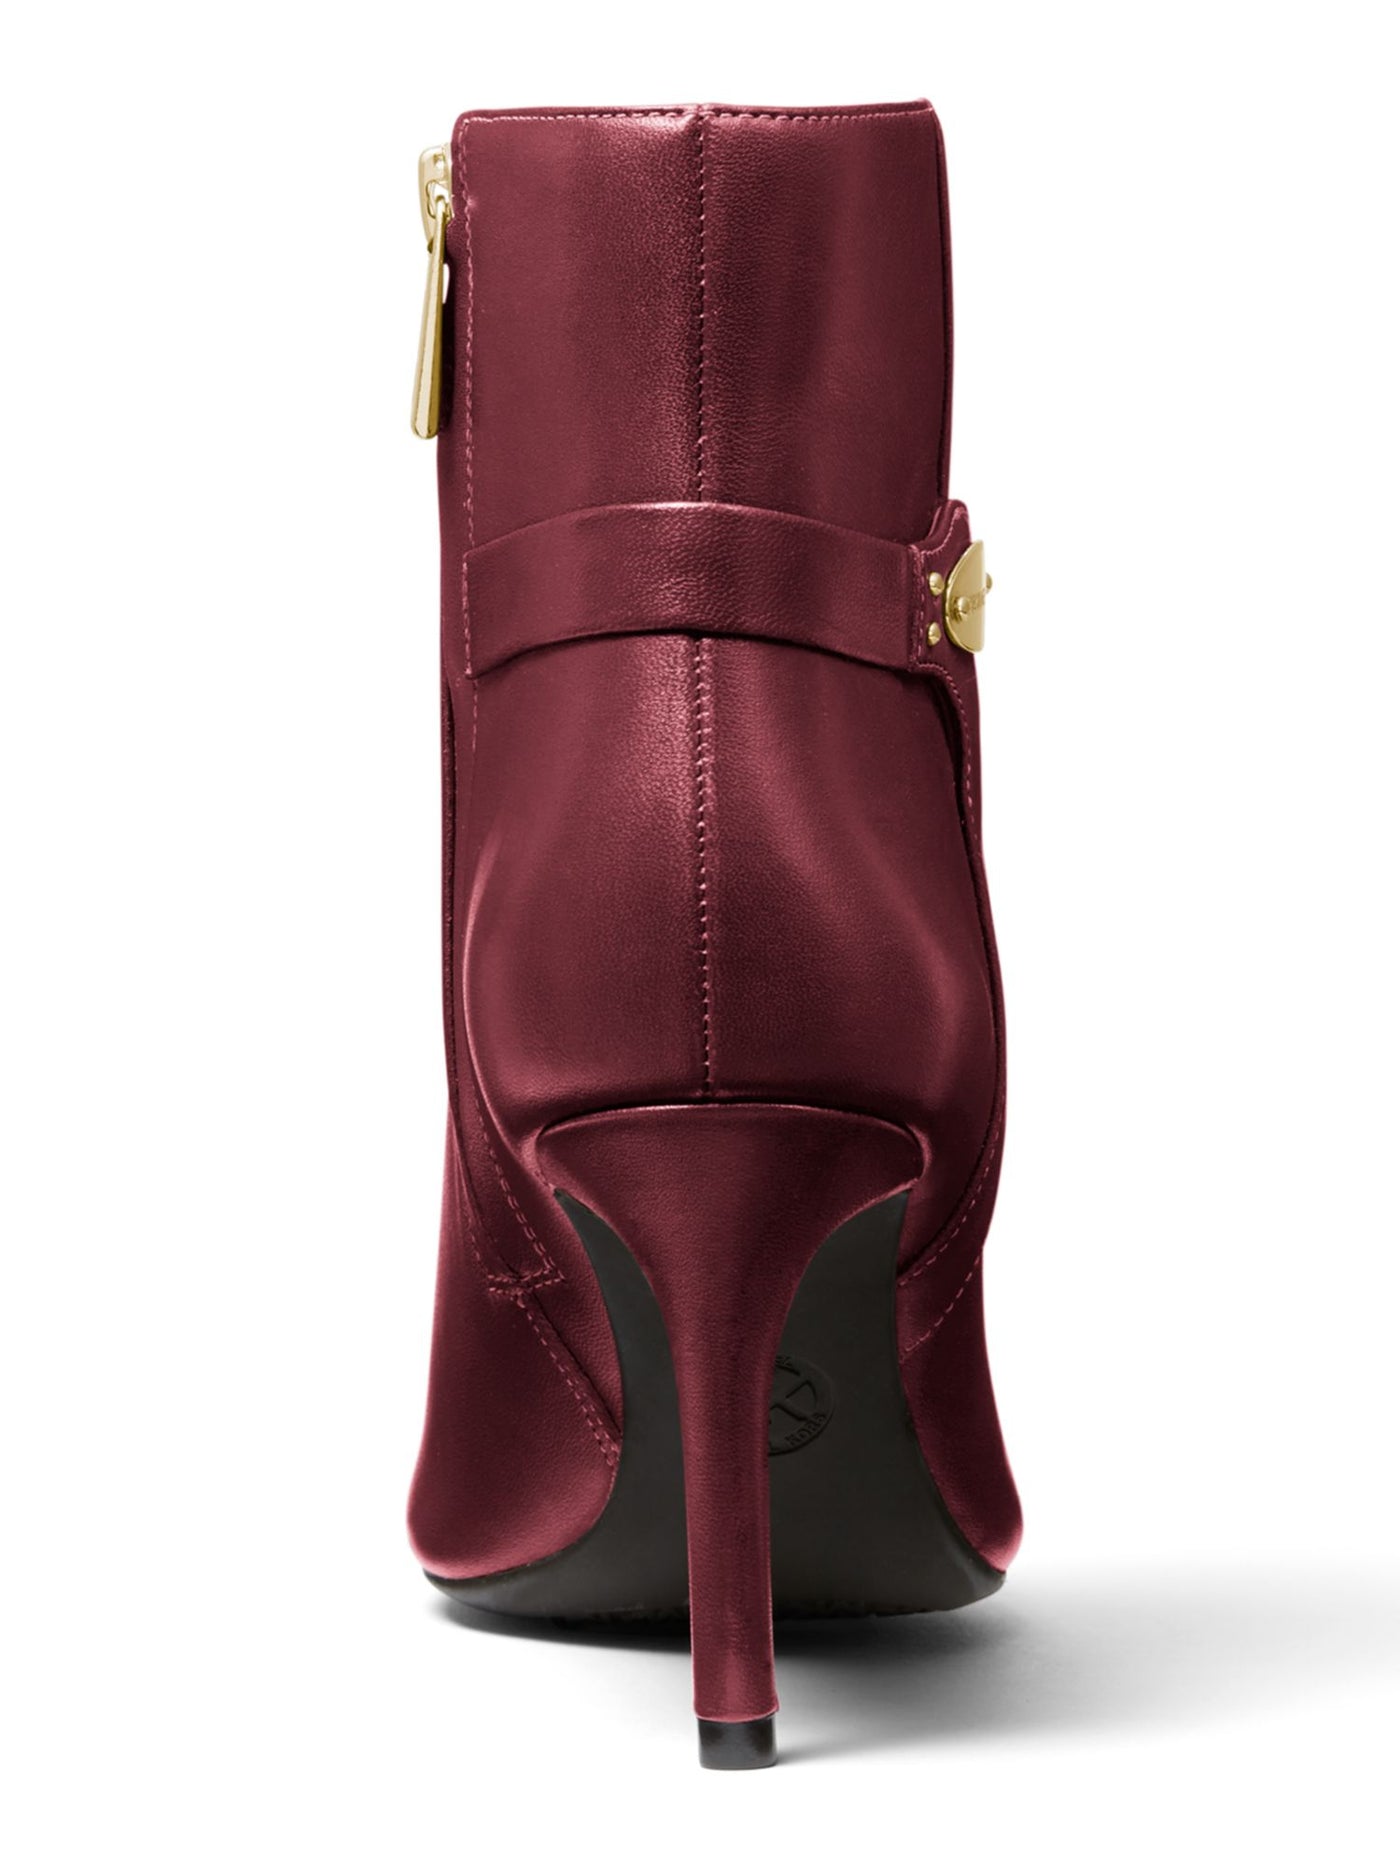 MICHAEL MICHAEL KORS Womens Dark Berry Burgundy Straps Logo-Embossed Plate Padded Finley Pointed Toe Stiletto Zip-Up Leather Booties 6 M